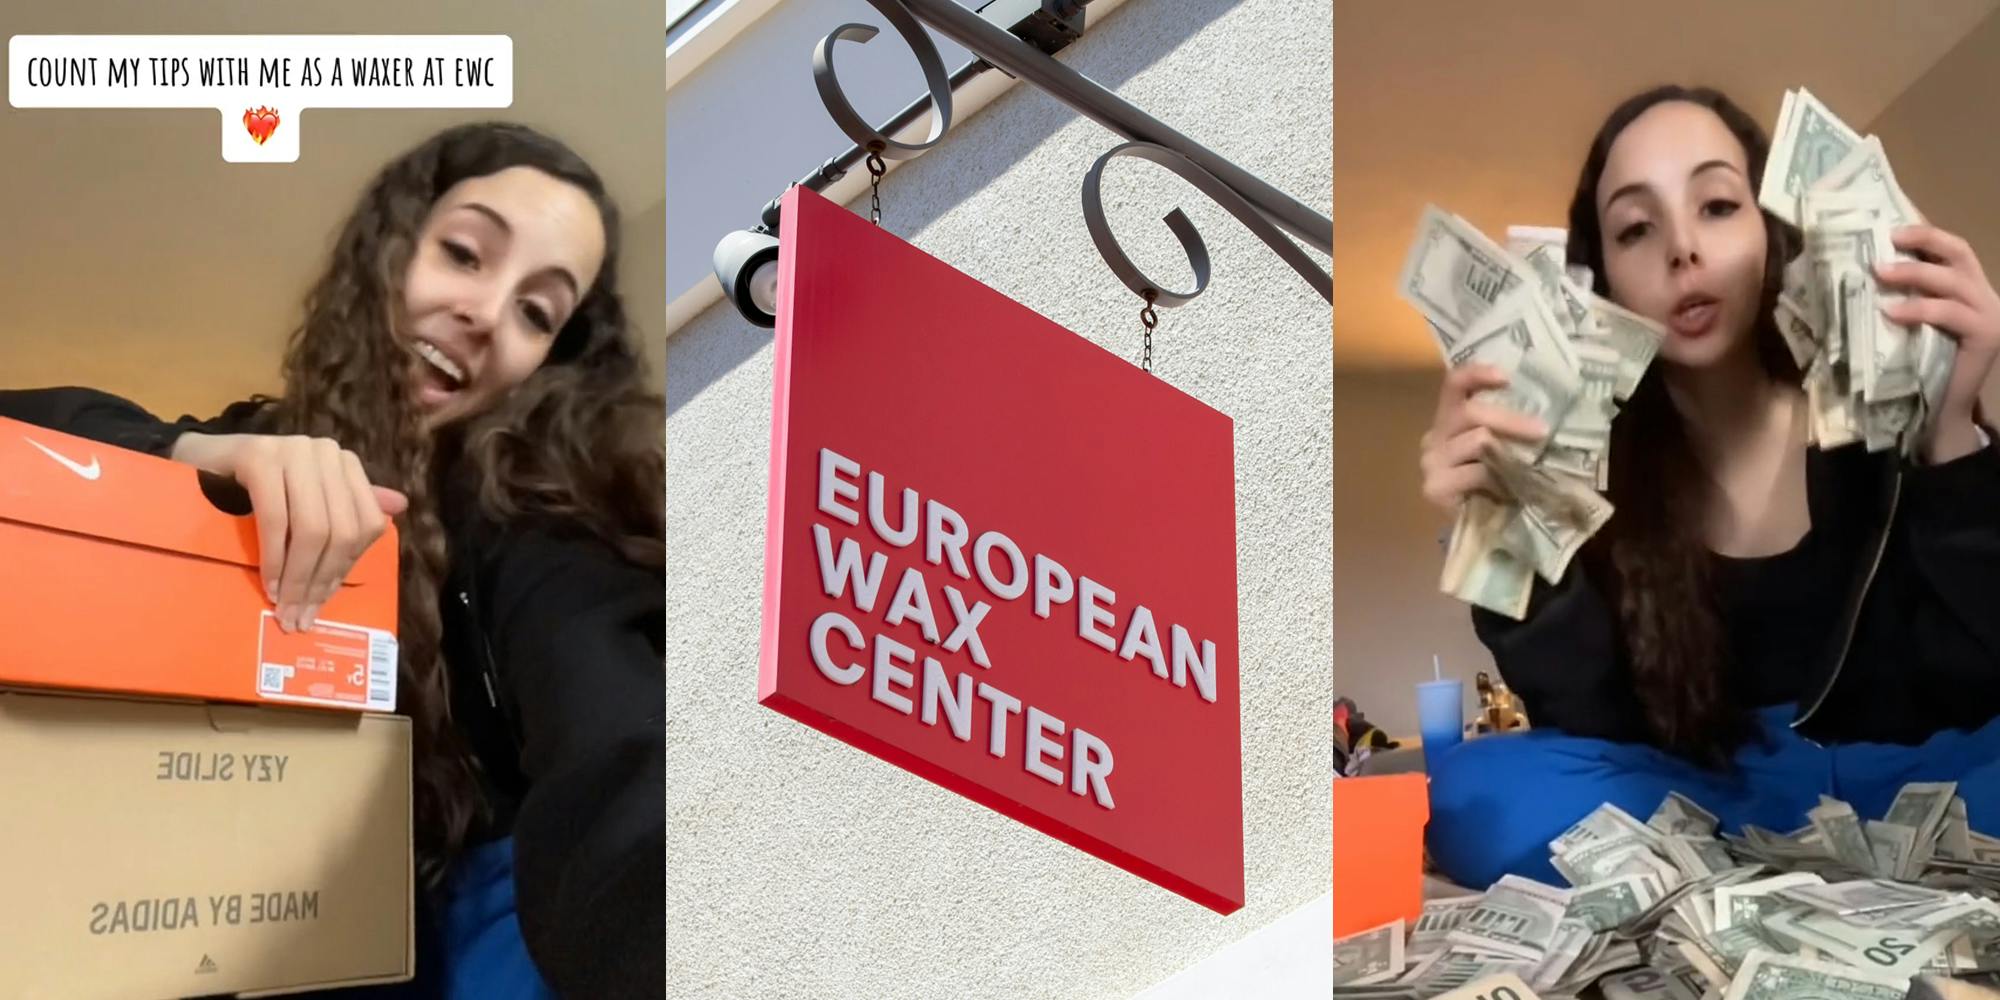 EWC former employee speaking with caption "Count my tips with me as a waxwe at EWC" (l) European Wax Center sign hanging on building (c) former EWC employee speaking holding cash above pile of cash (r)